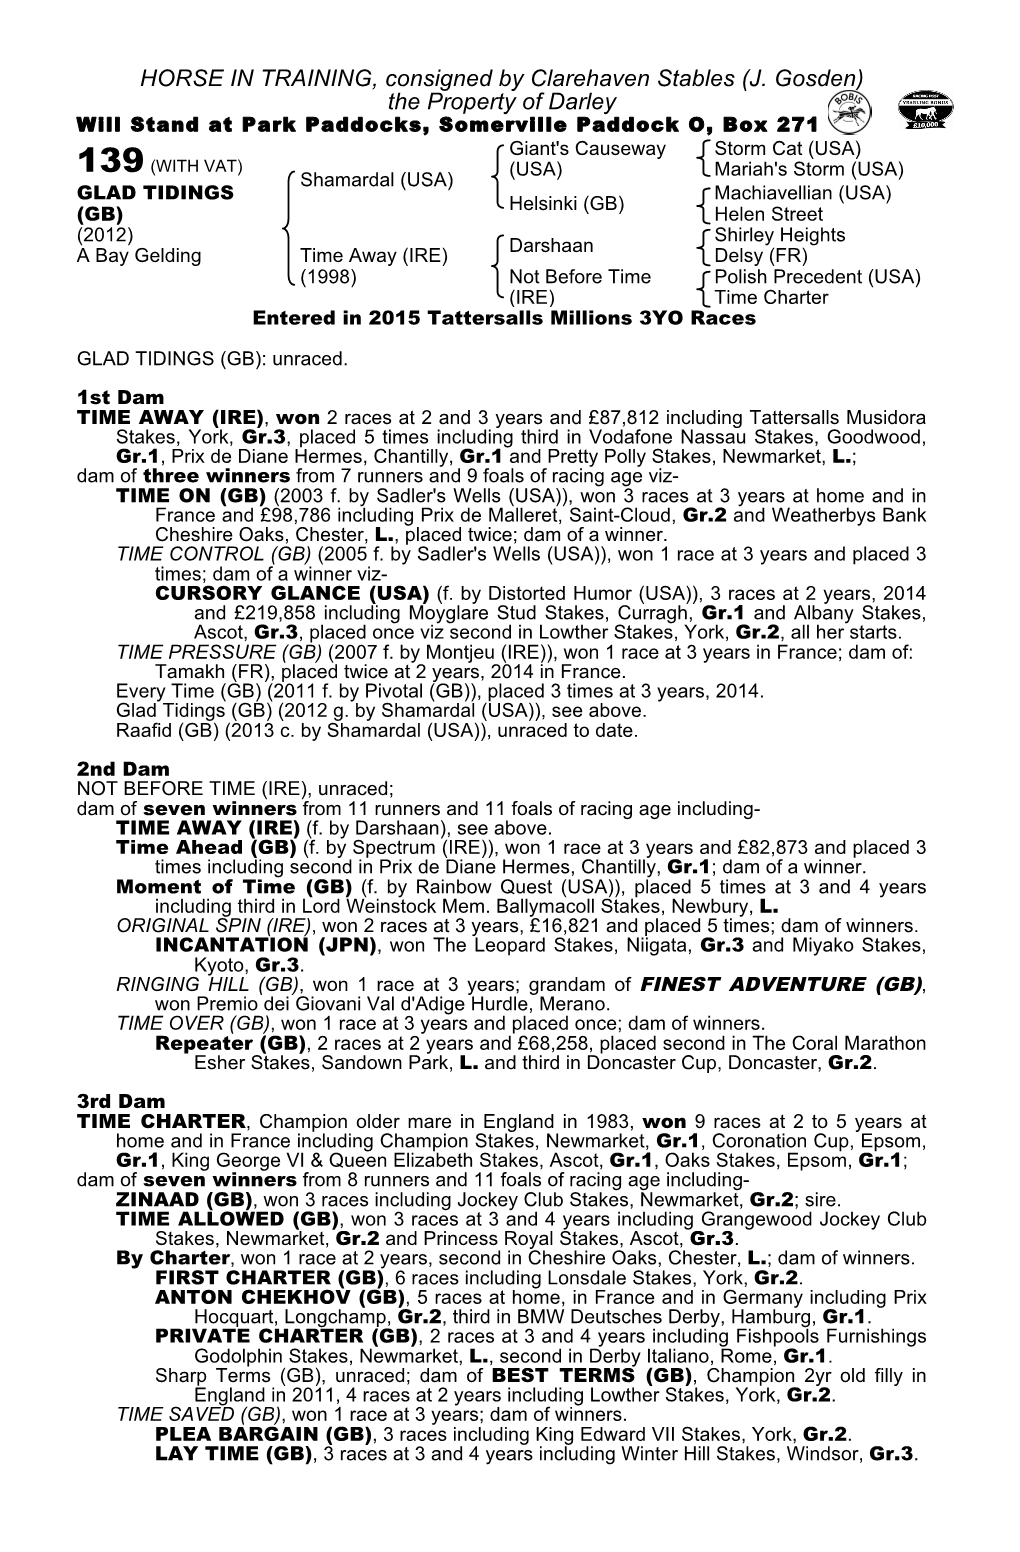 HORSE in TRAINING, Consigned by Clarehaven Stables (J. Gosden) the Property of Darley